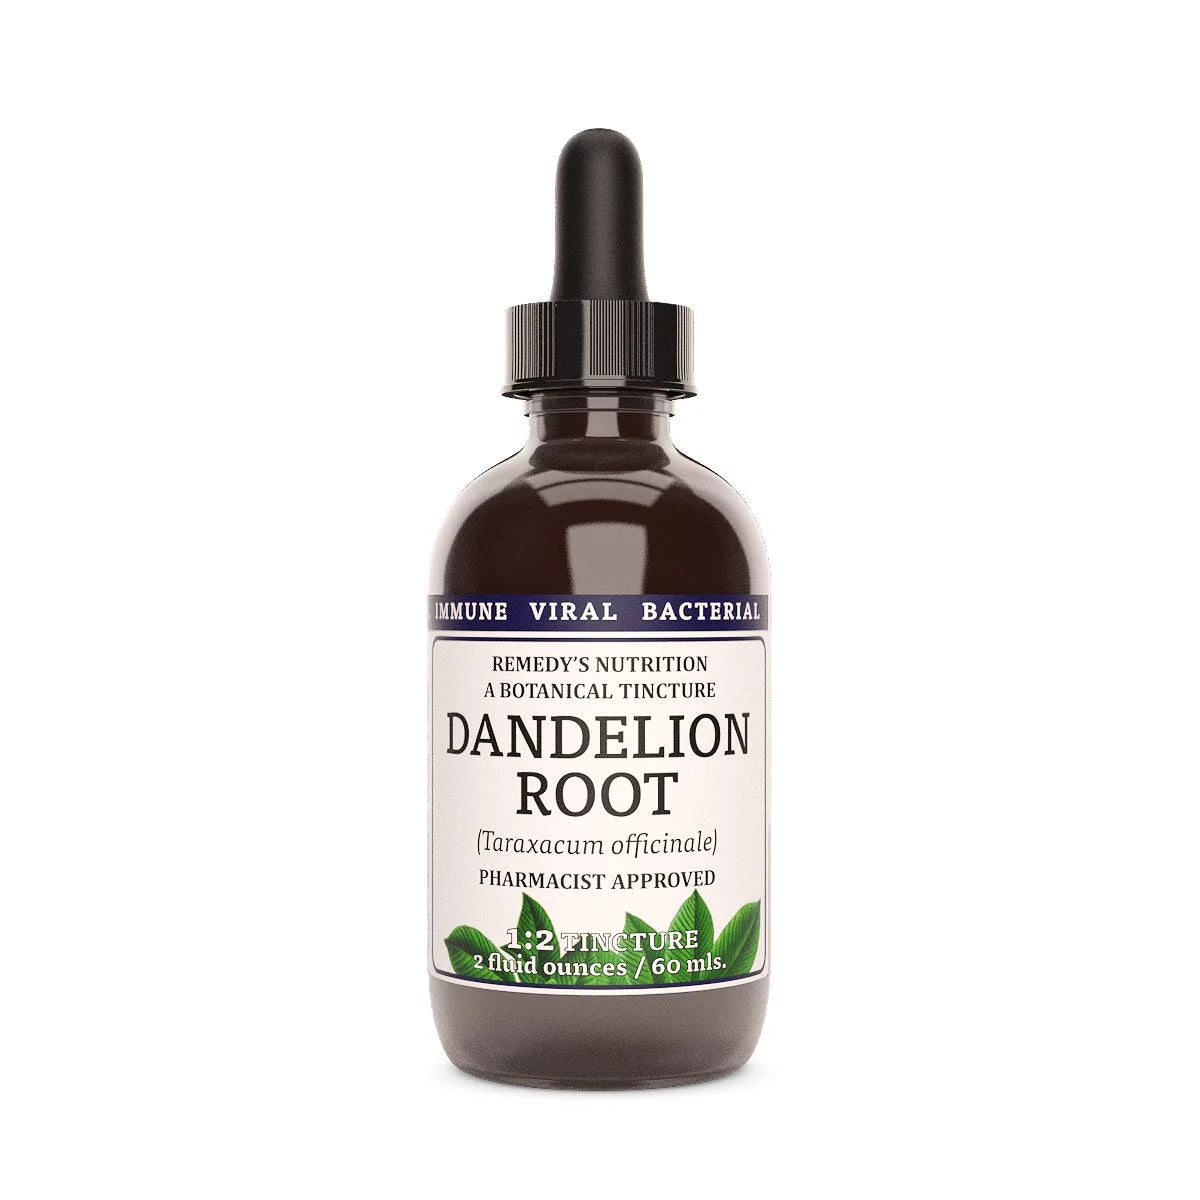 Image of Remedy's Nutrition® Dandelion Root Tincture Dietary Supplement front bottle. Made in the USA. Taraxacum officinale.